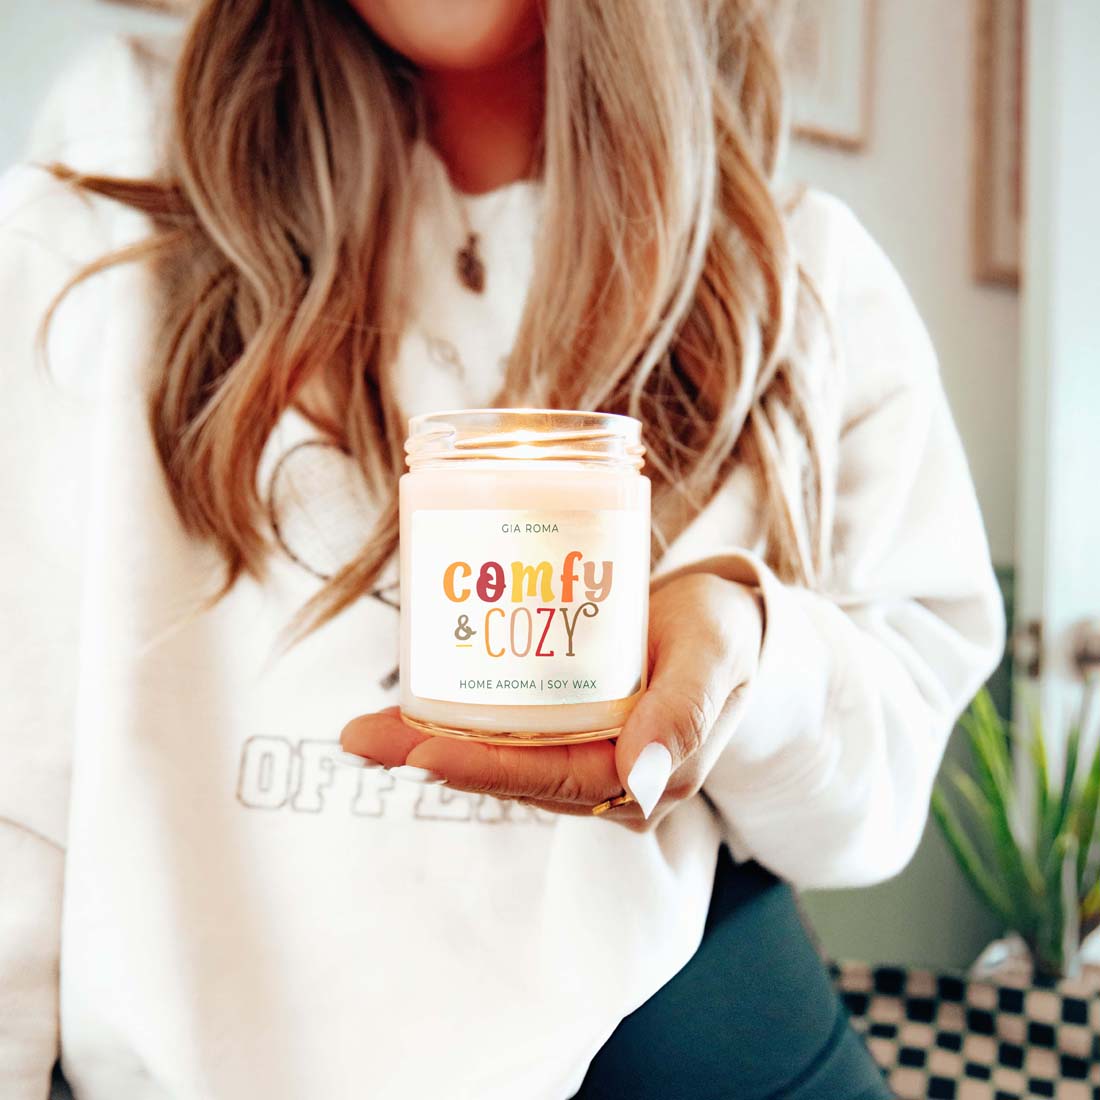 Where can I buy fall candles?